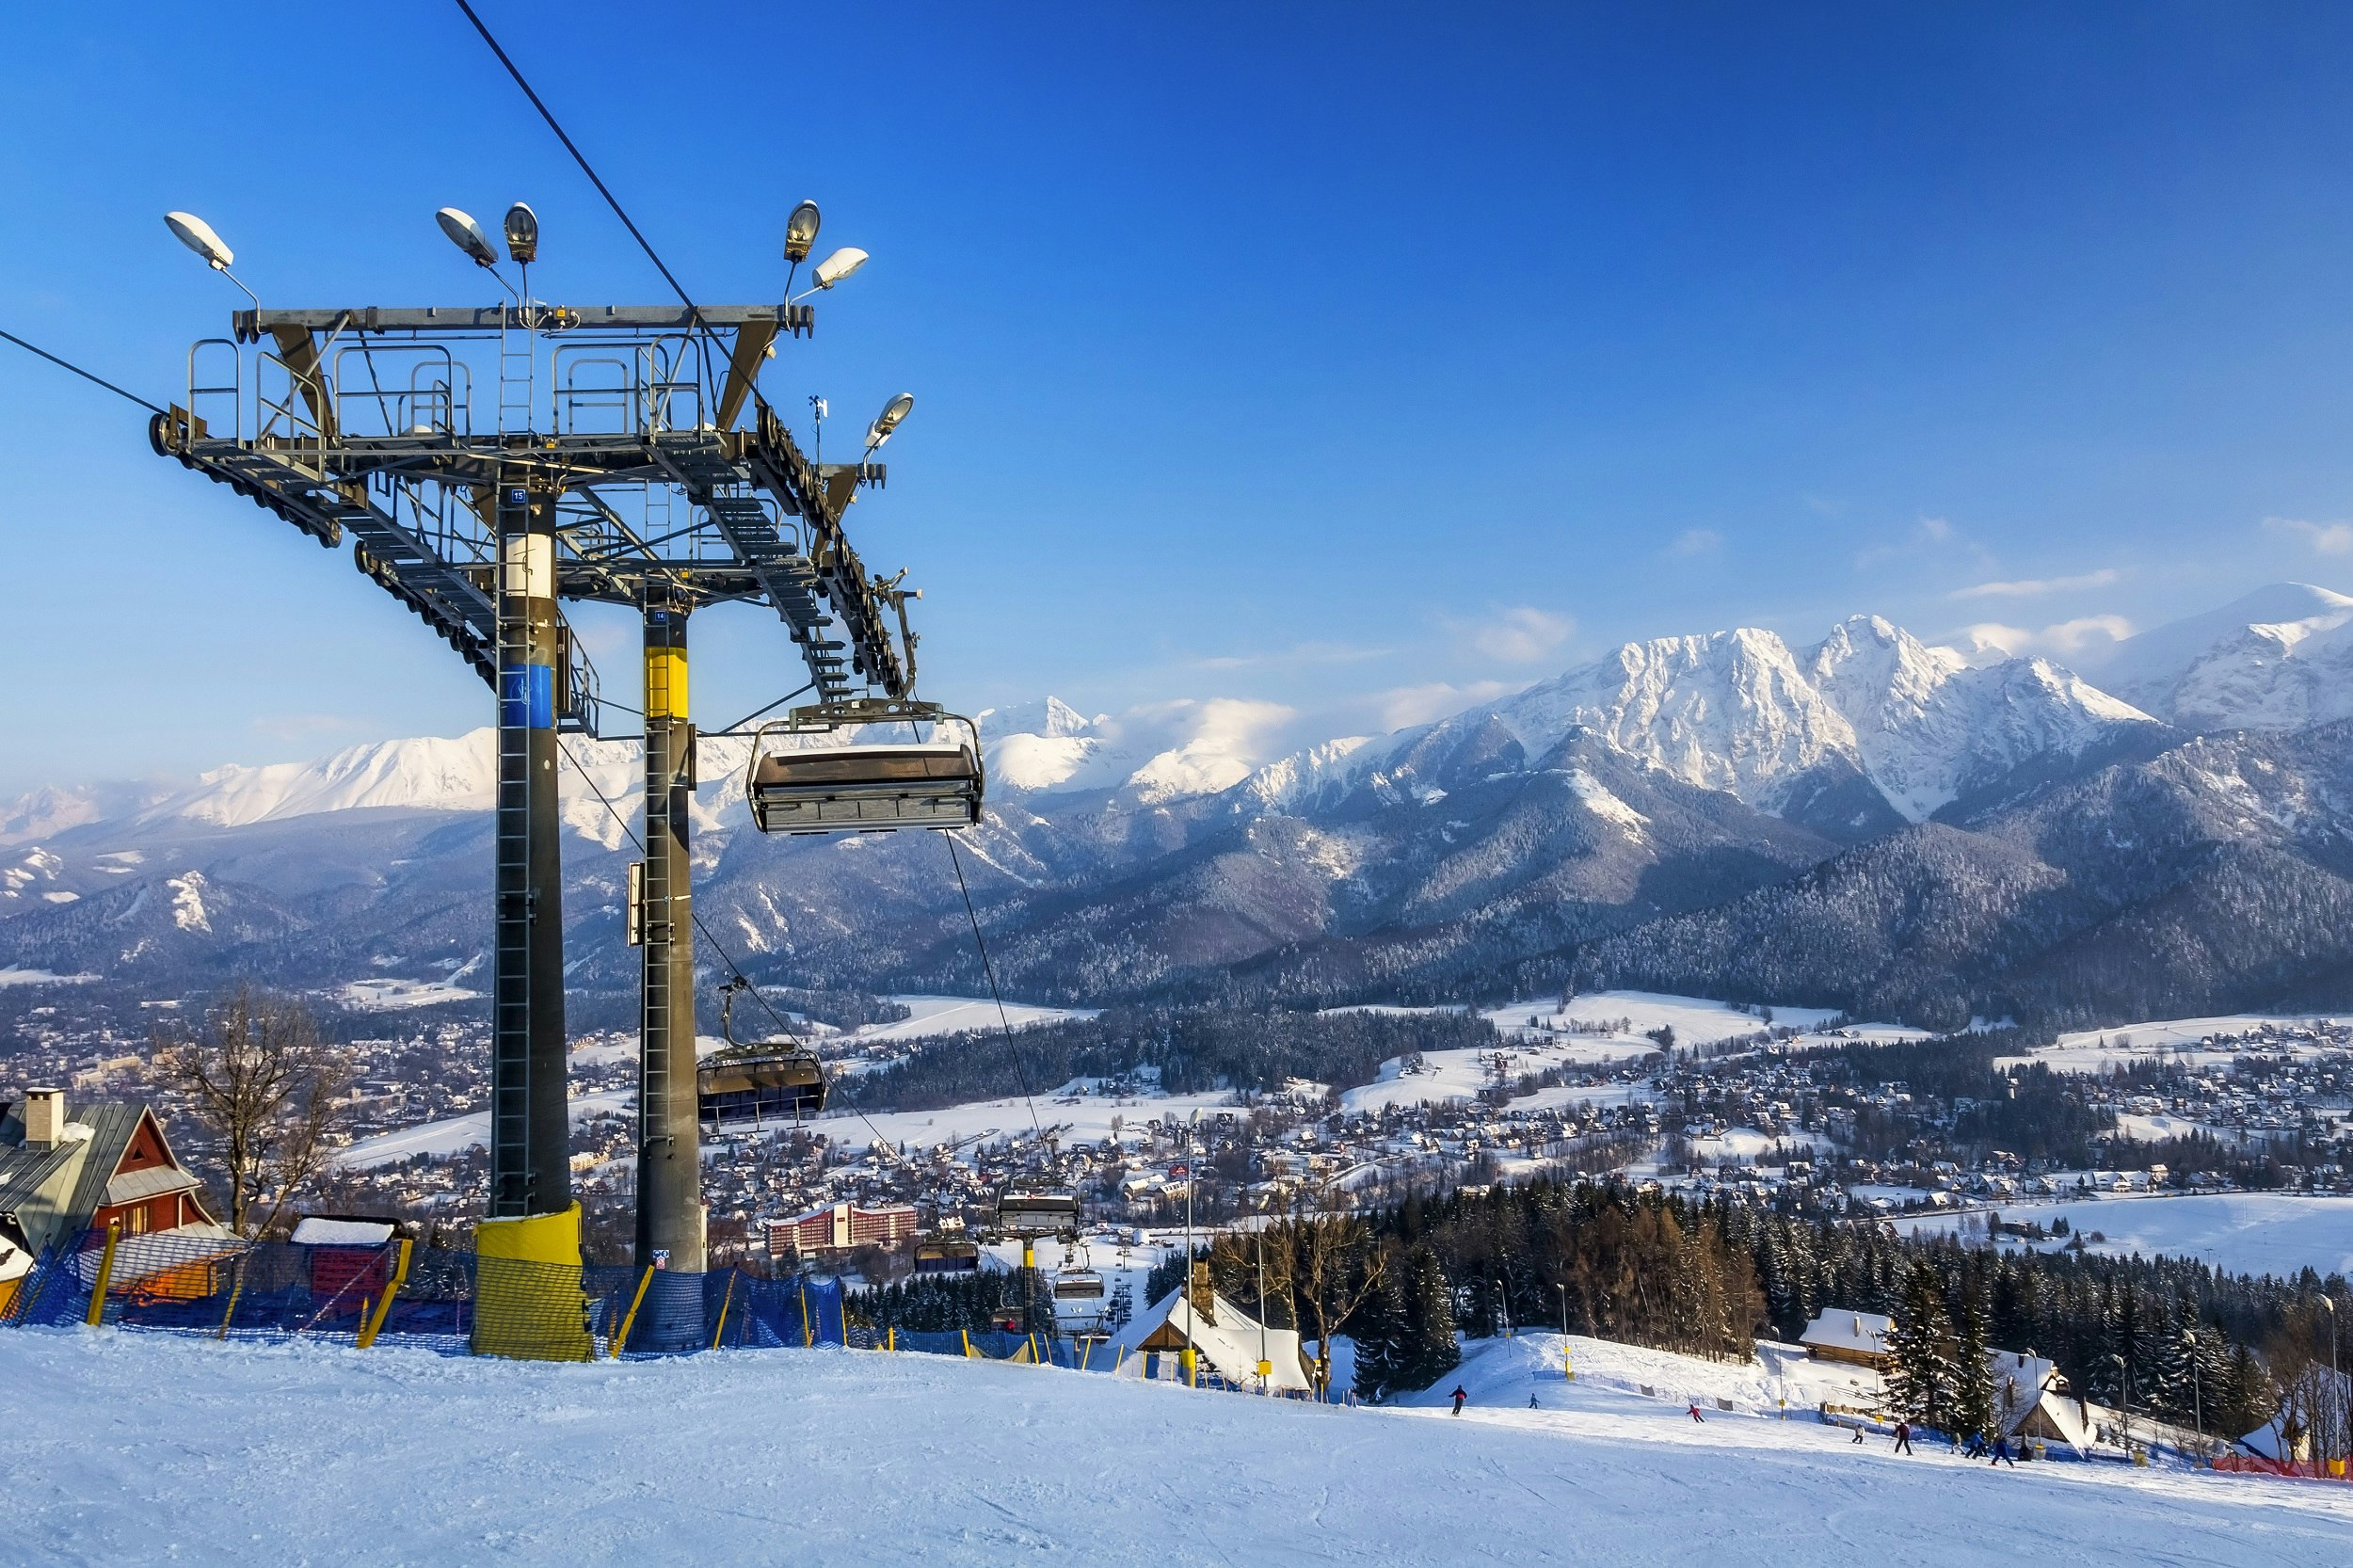 A ski lift on a snowy mountain with a range of snow-topped mountains stretching out in the distance. A town and woodland can be seen in the valley